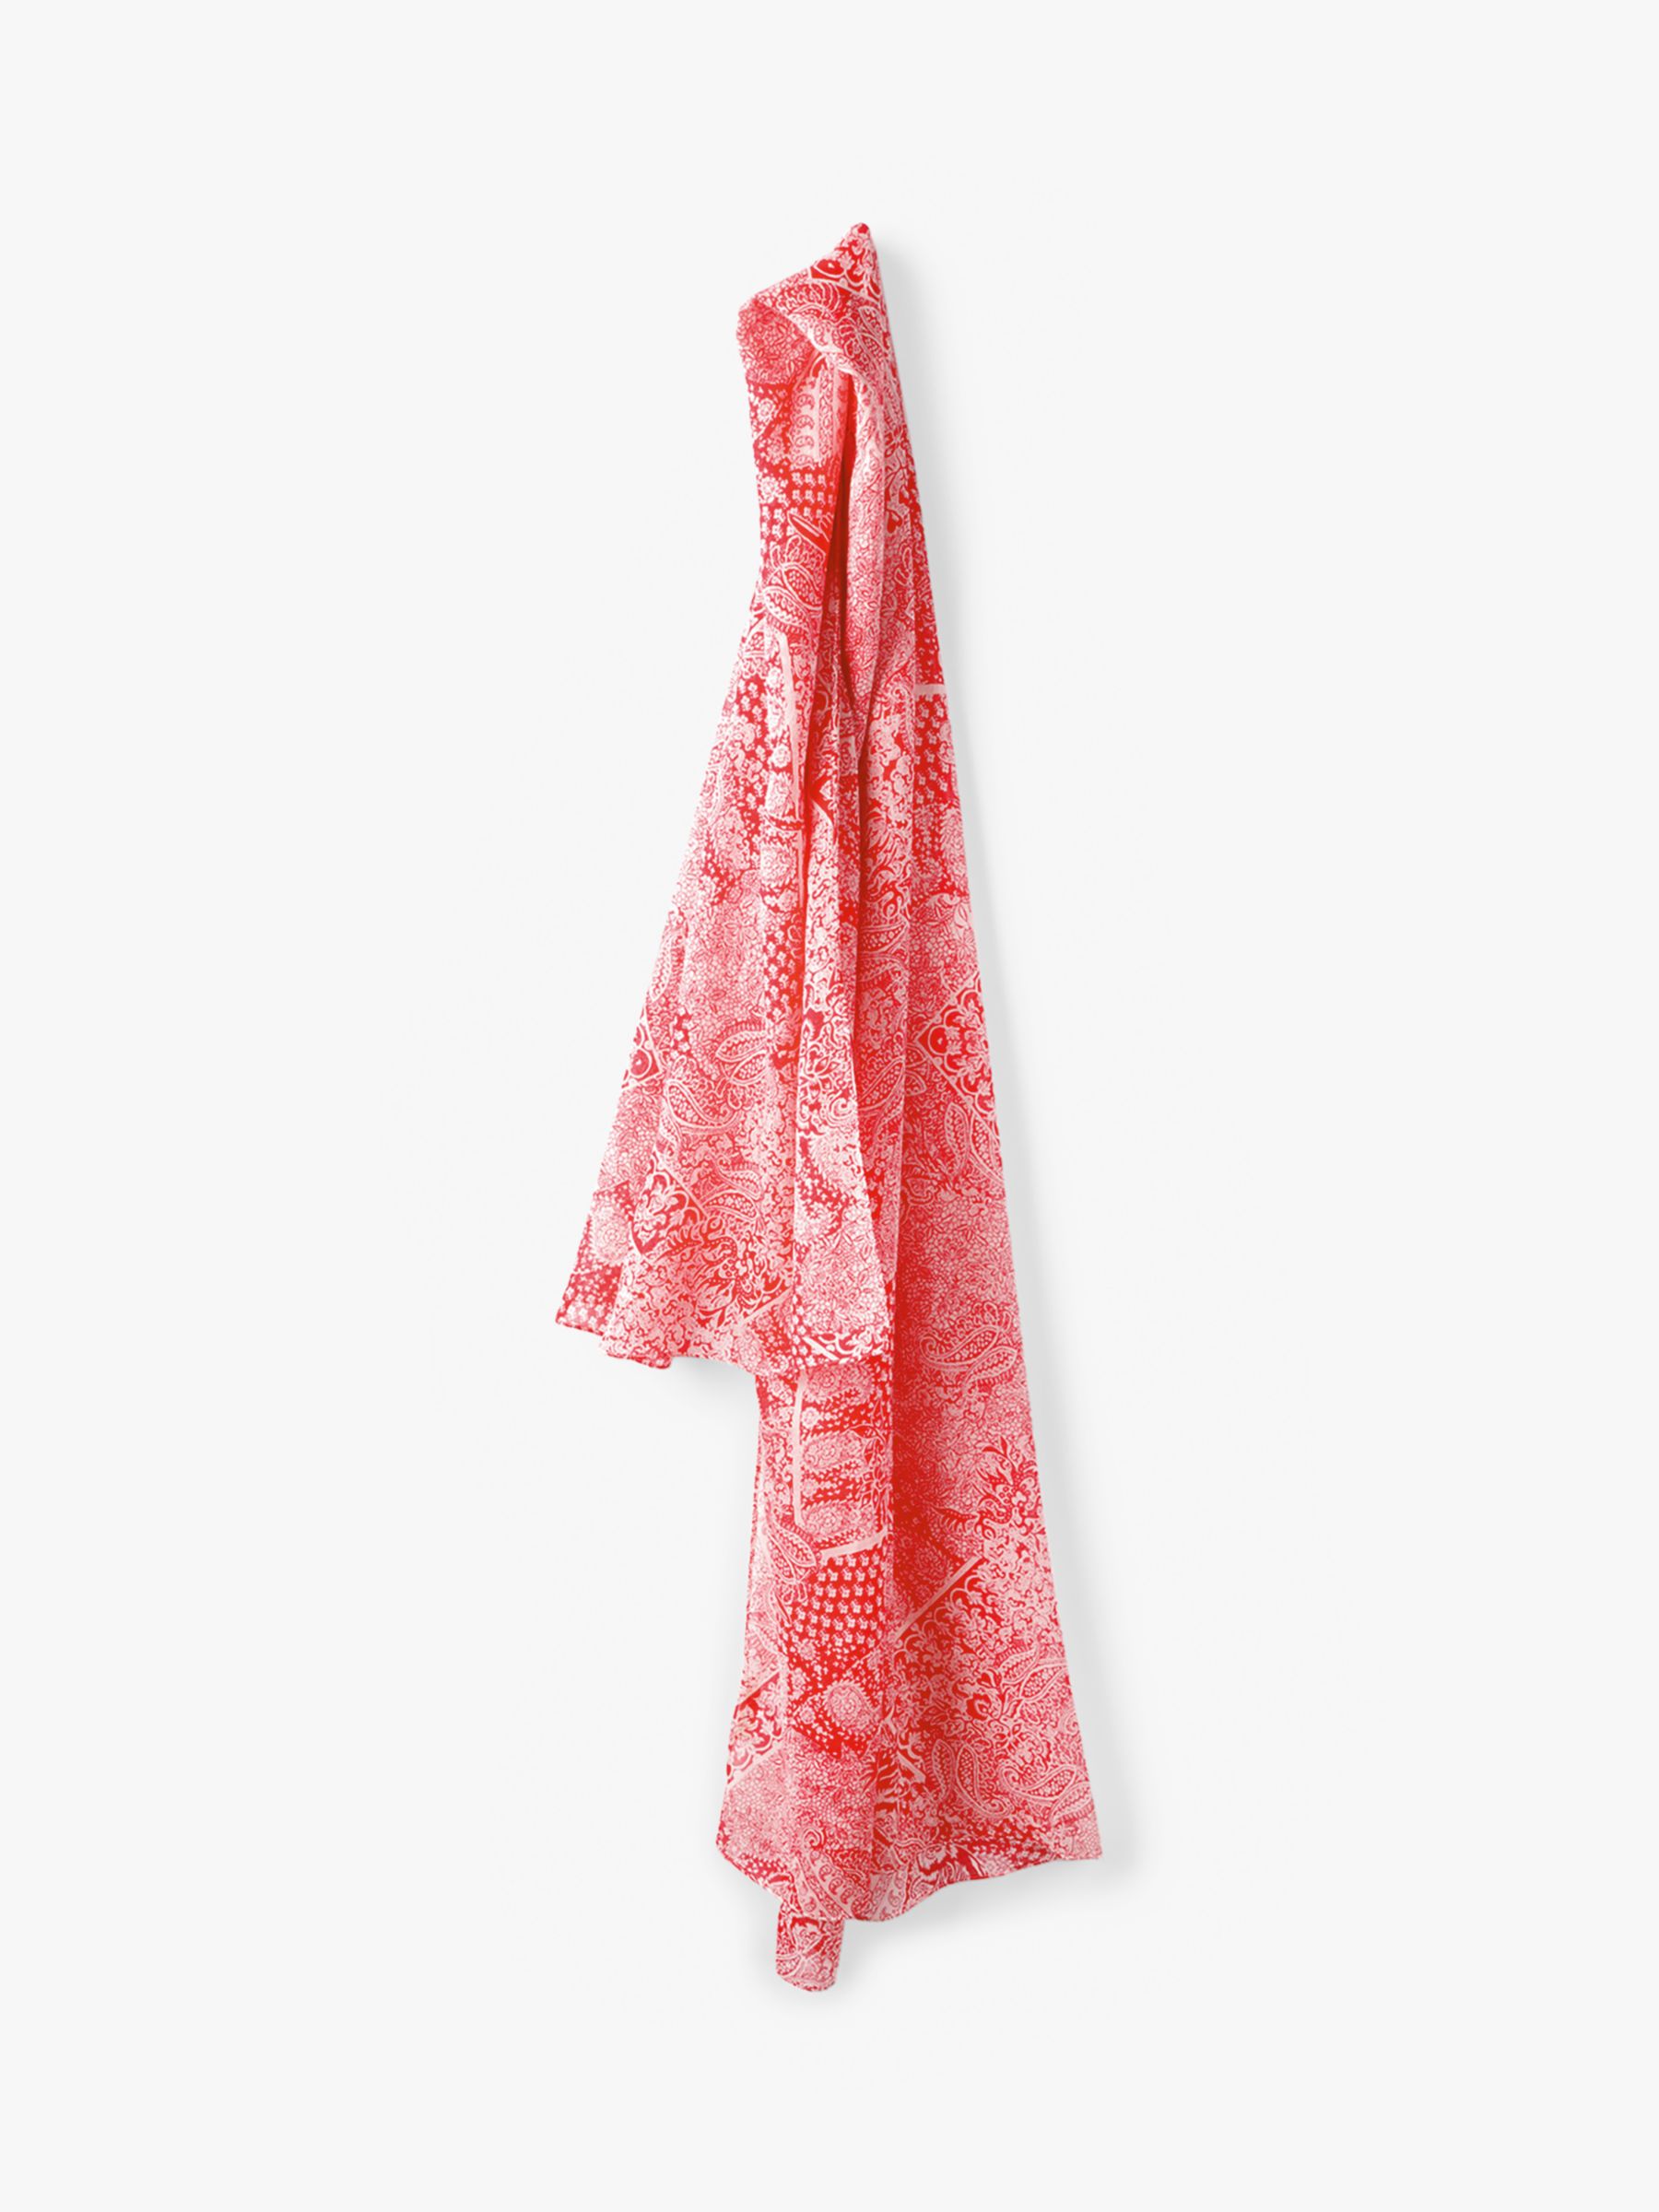 red and white scarf